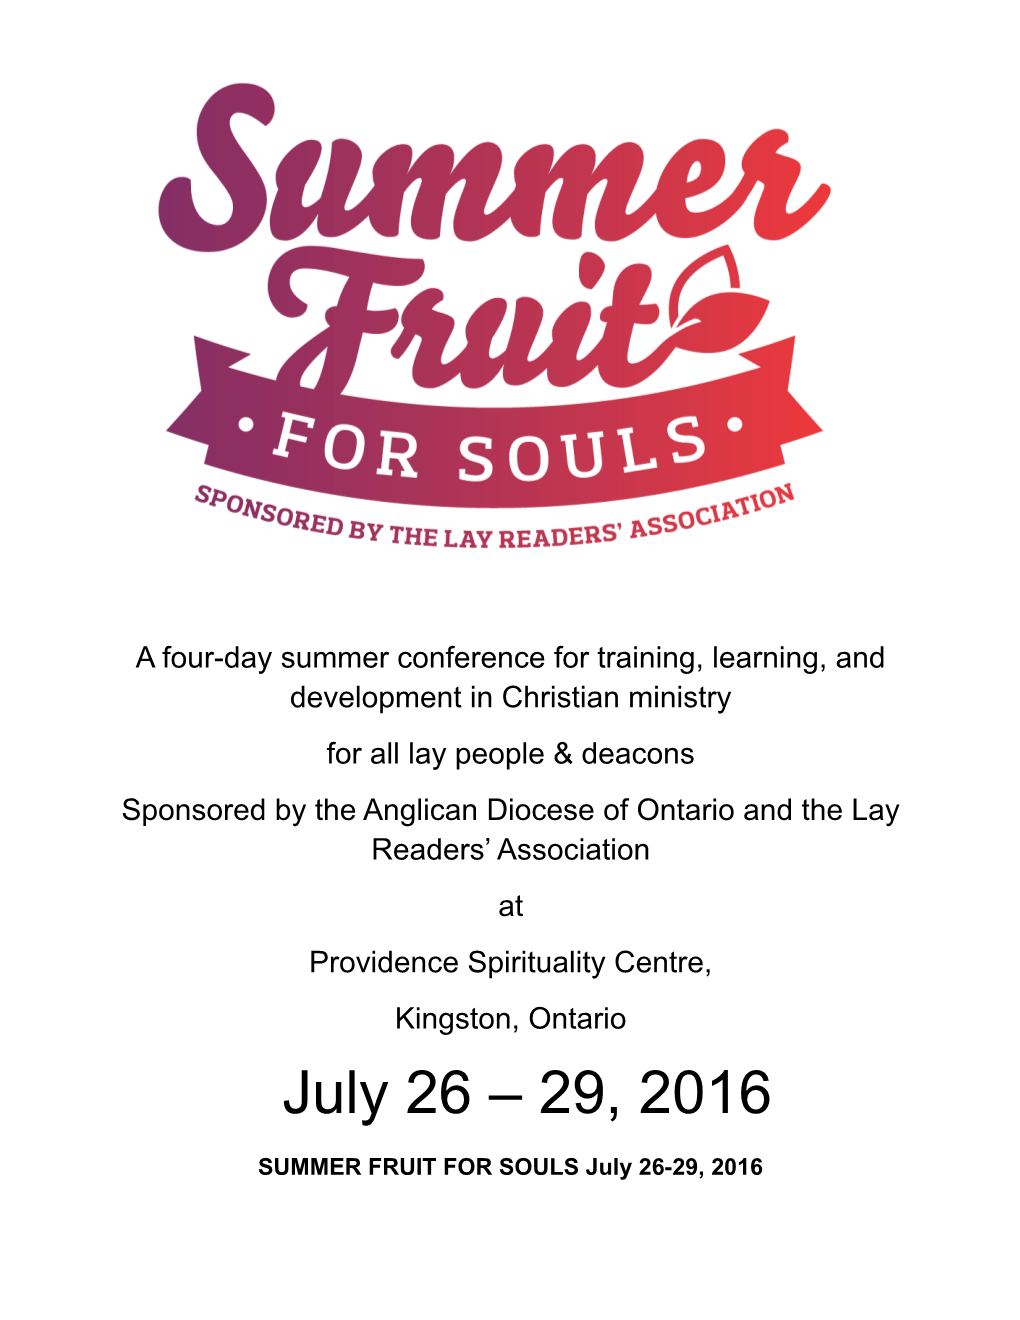 A Four-Day Summer Conference for Training, Learning, and Development in Christian Ministry